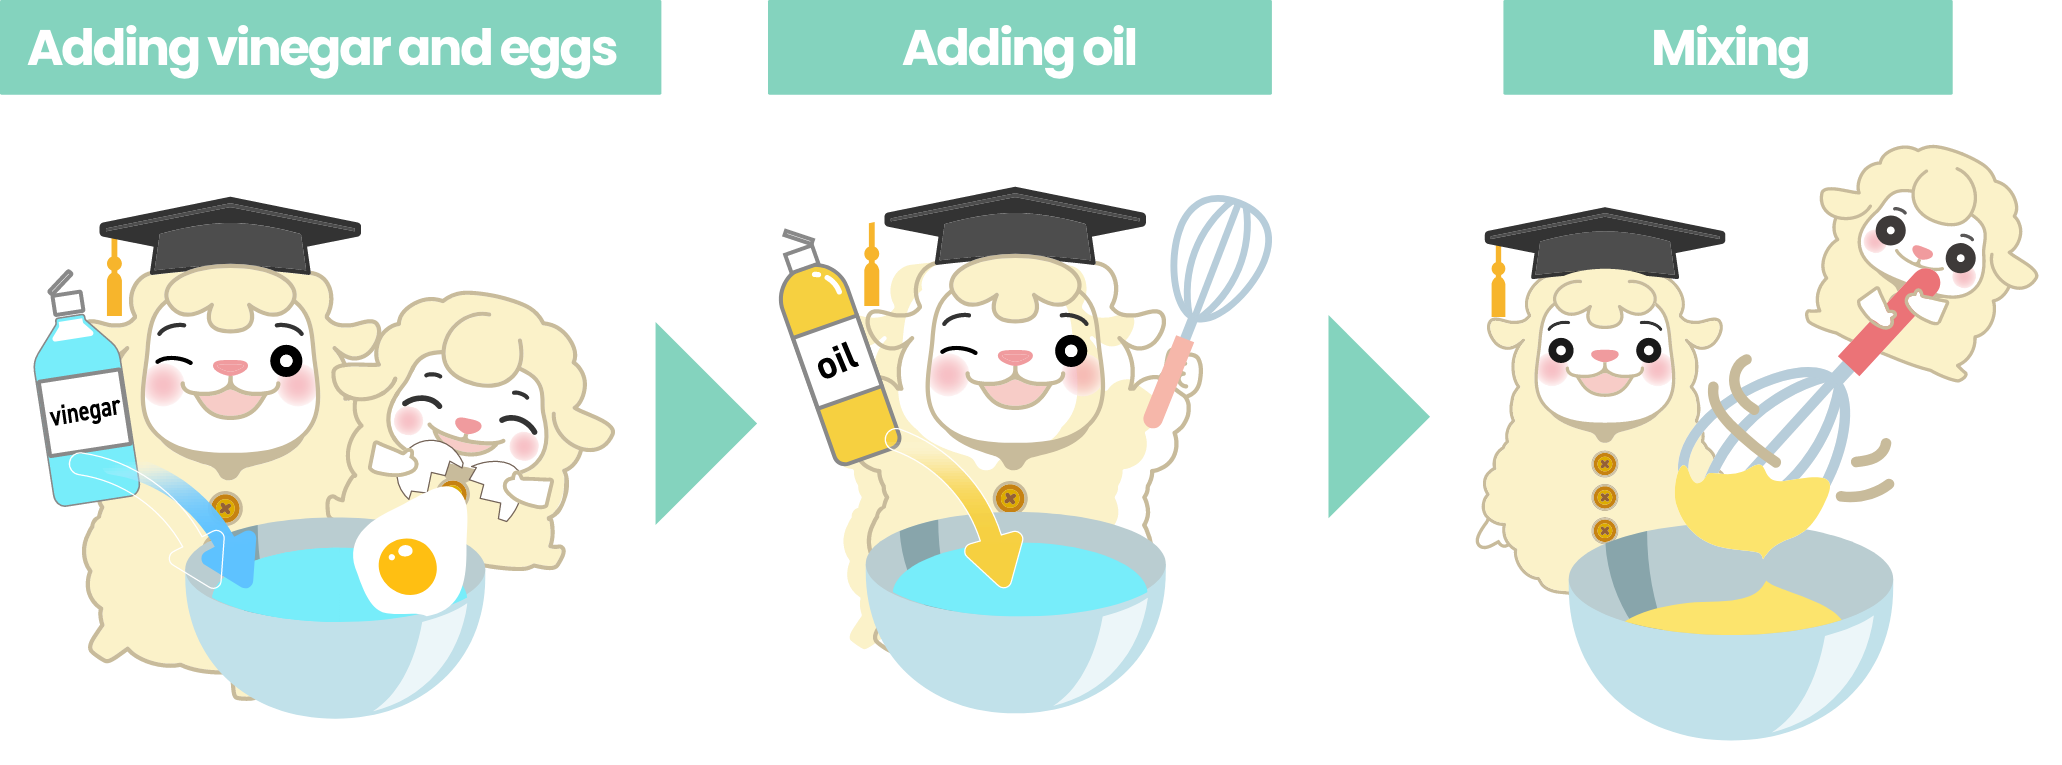 Adding vinegar and eggs→Adding oil→Mixing